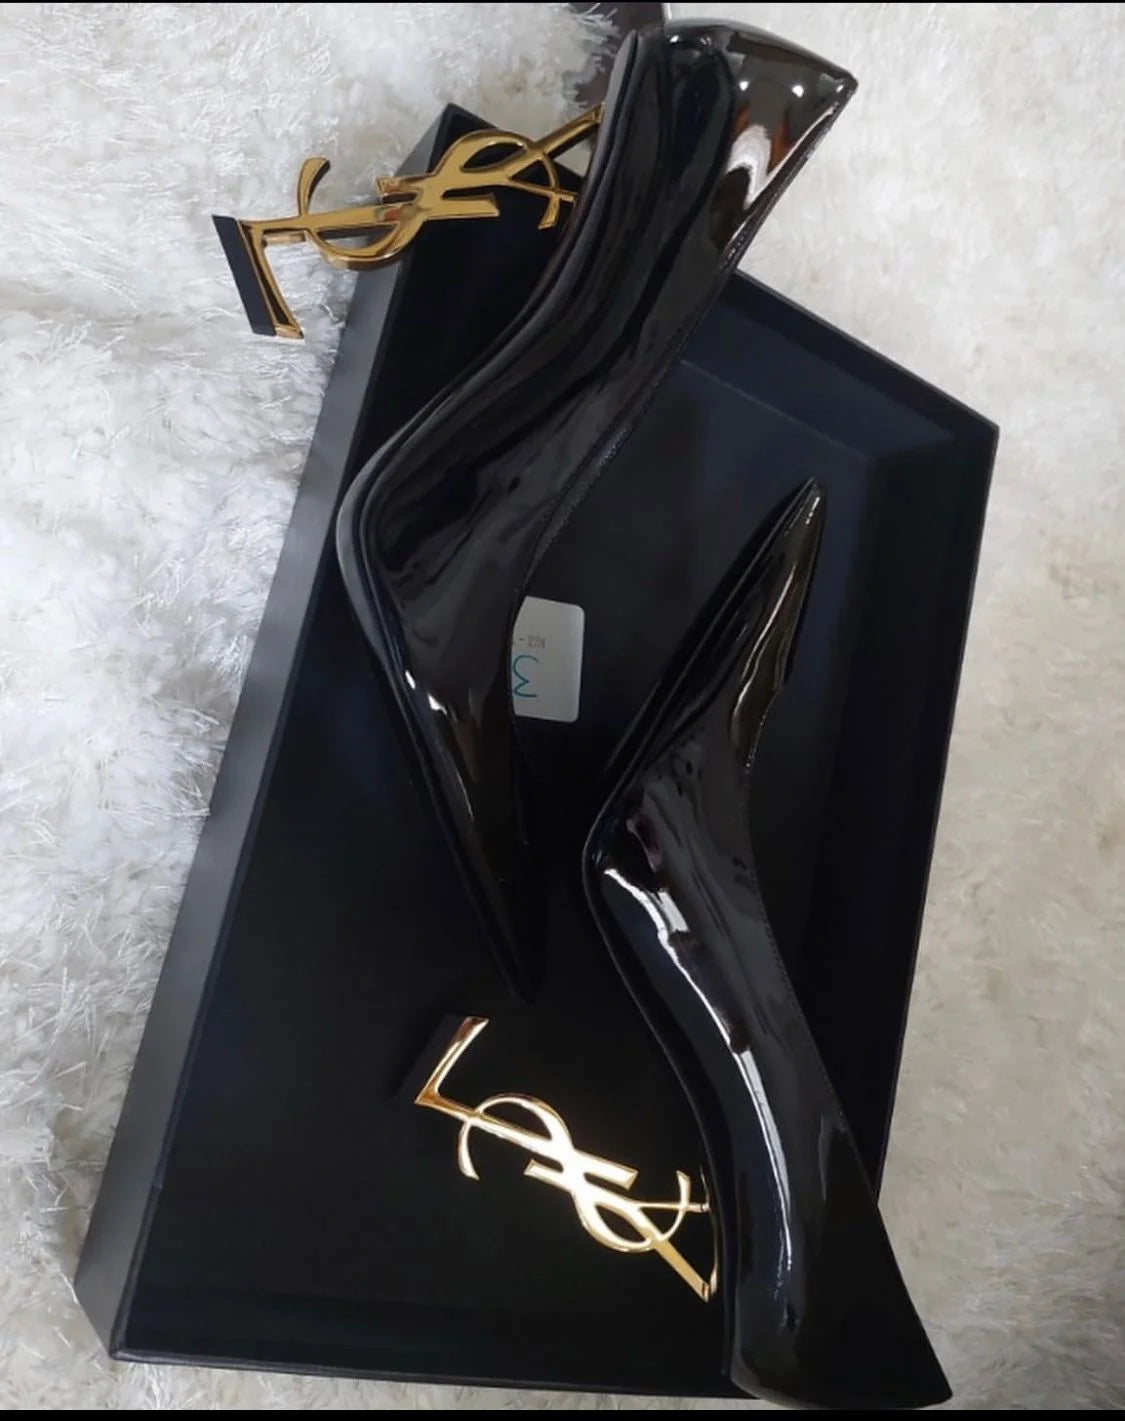 YSL - OPYUM PUMPS IN PATENT LEATHER